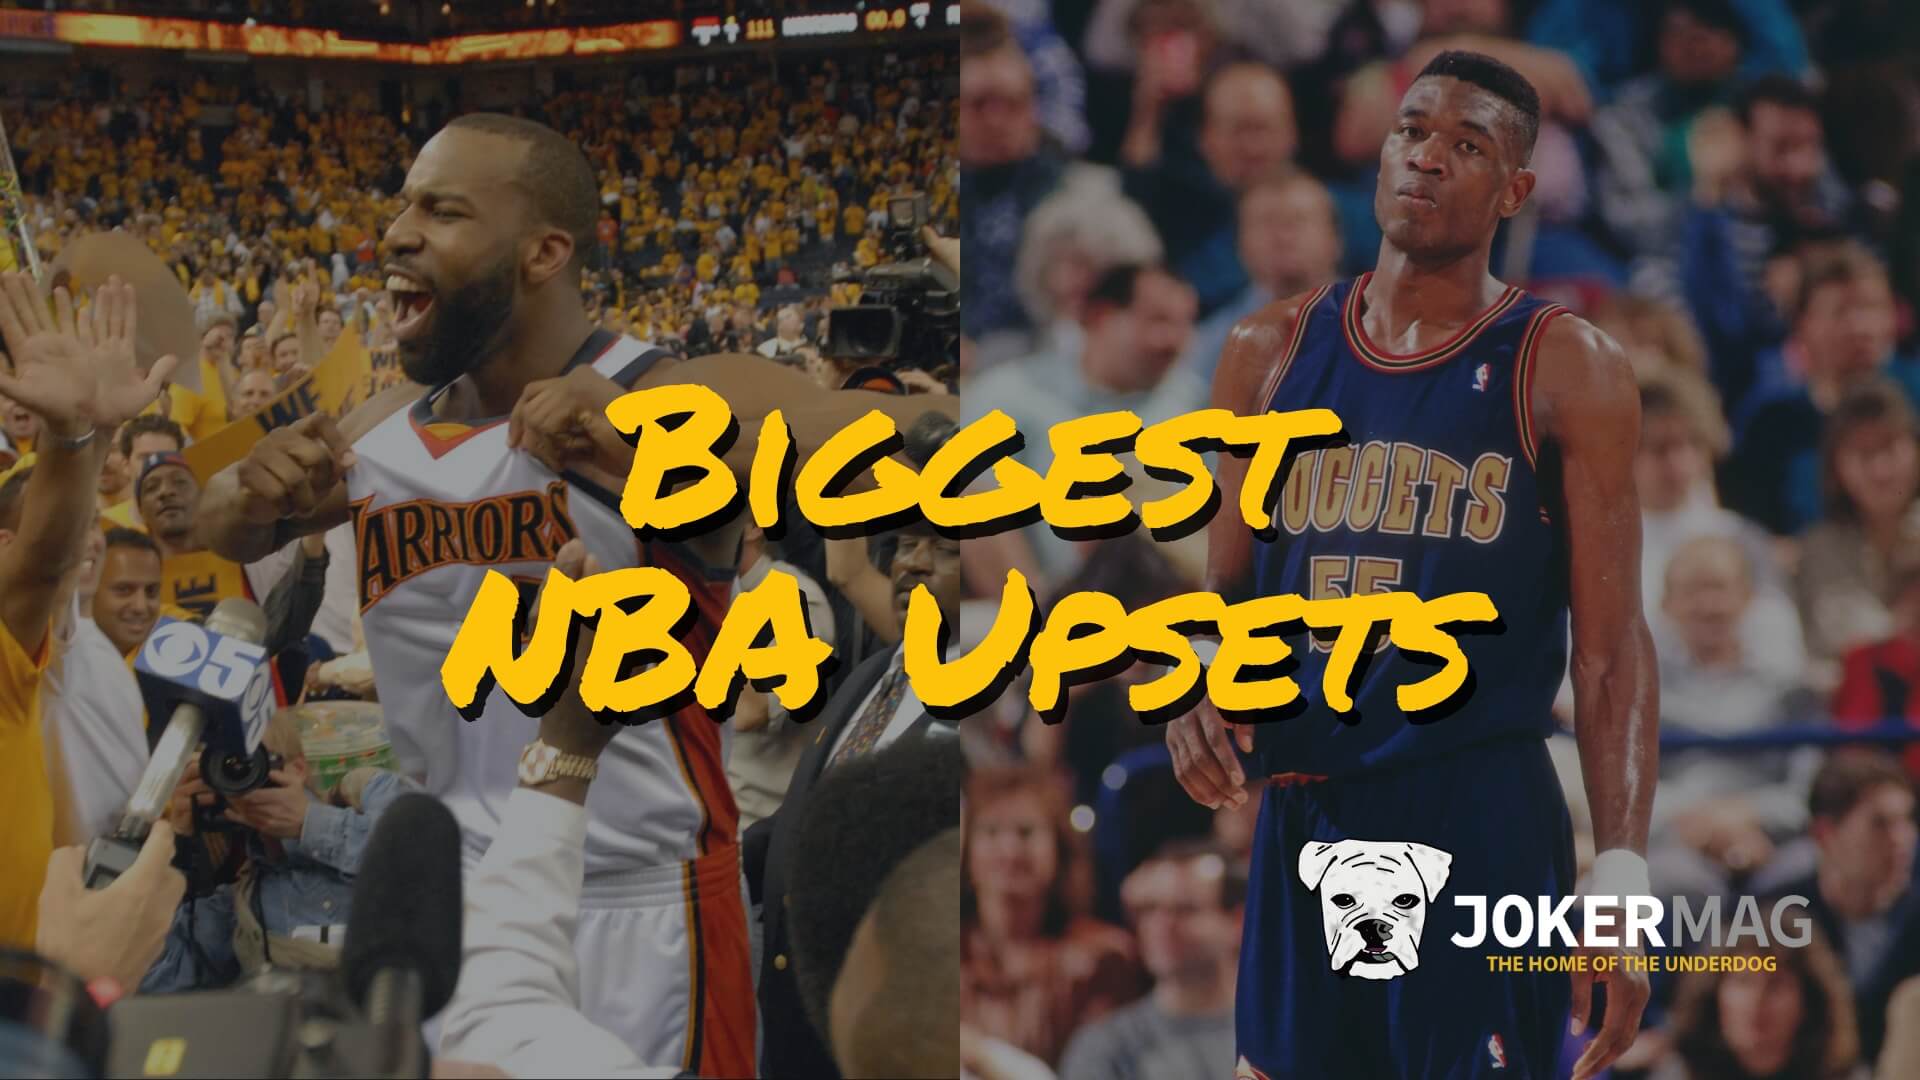 Breaking down the biggest upsets in NBA history